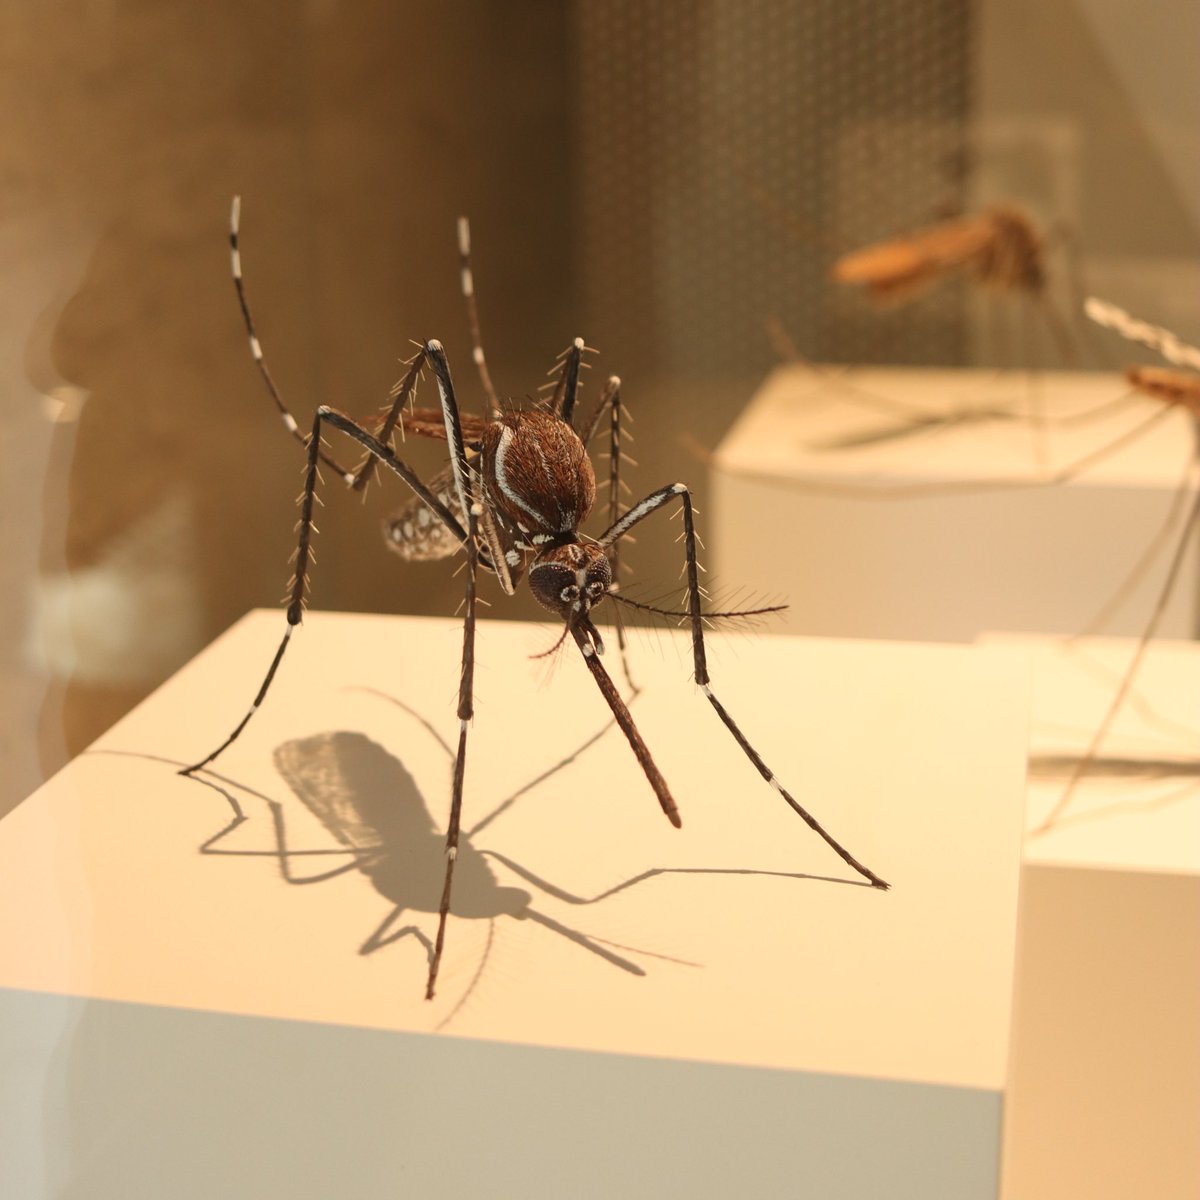 Finally found a mosquito in New York today! Beautiful models in @AMNH (couldn’t find any mozzie merch in gift shop though) 🦟